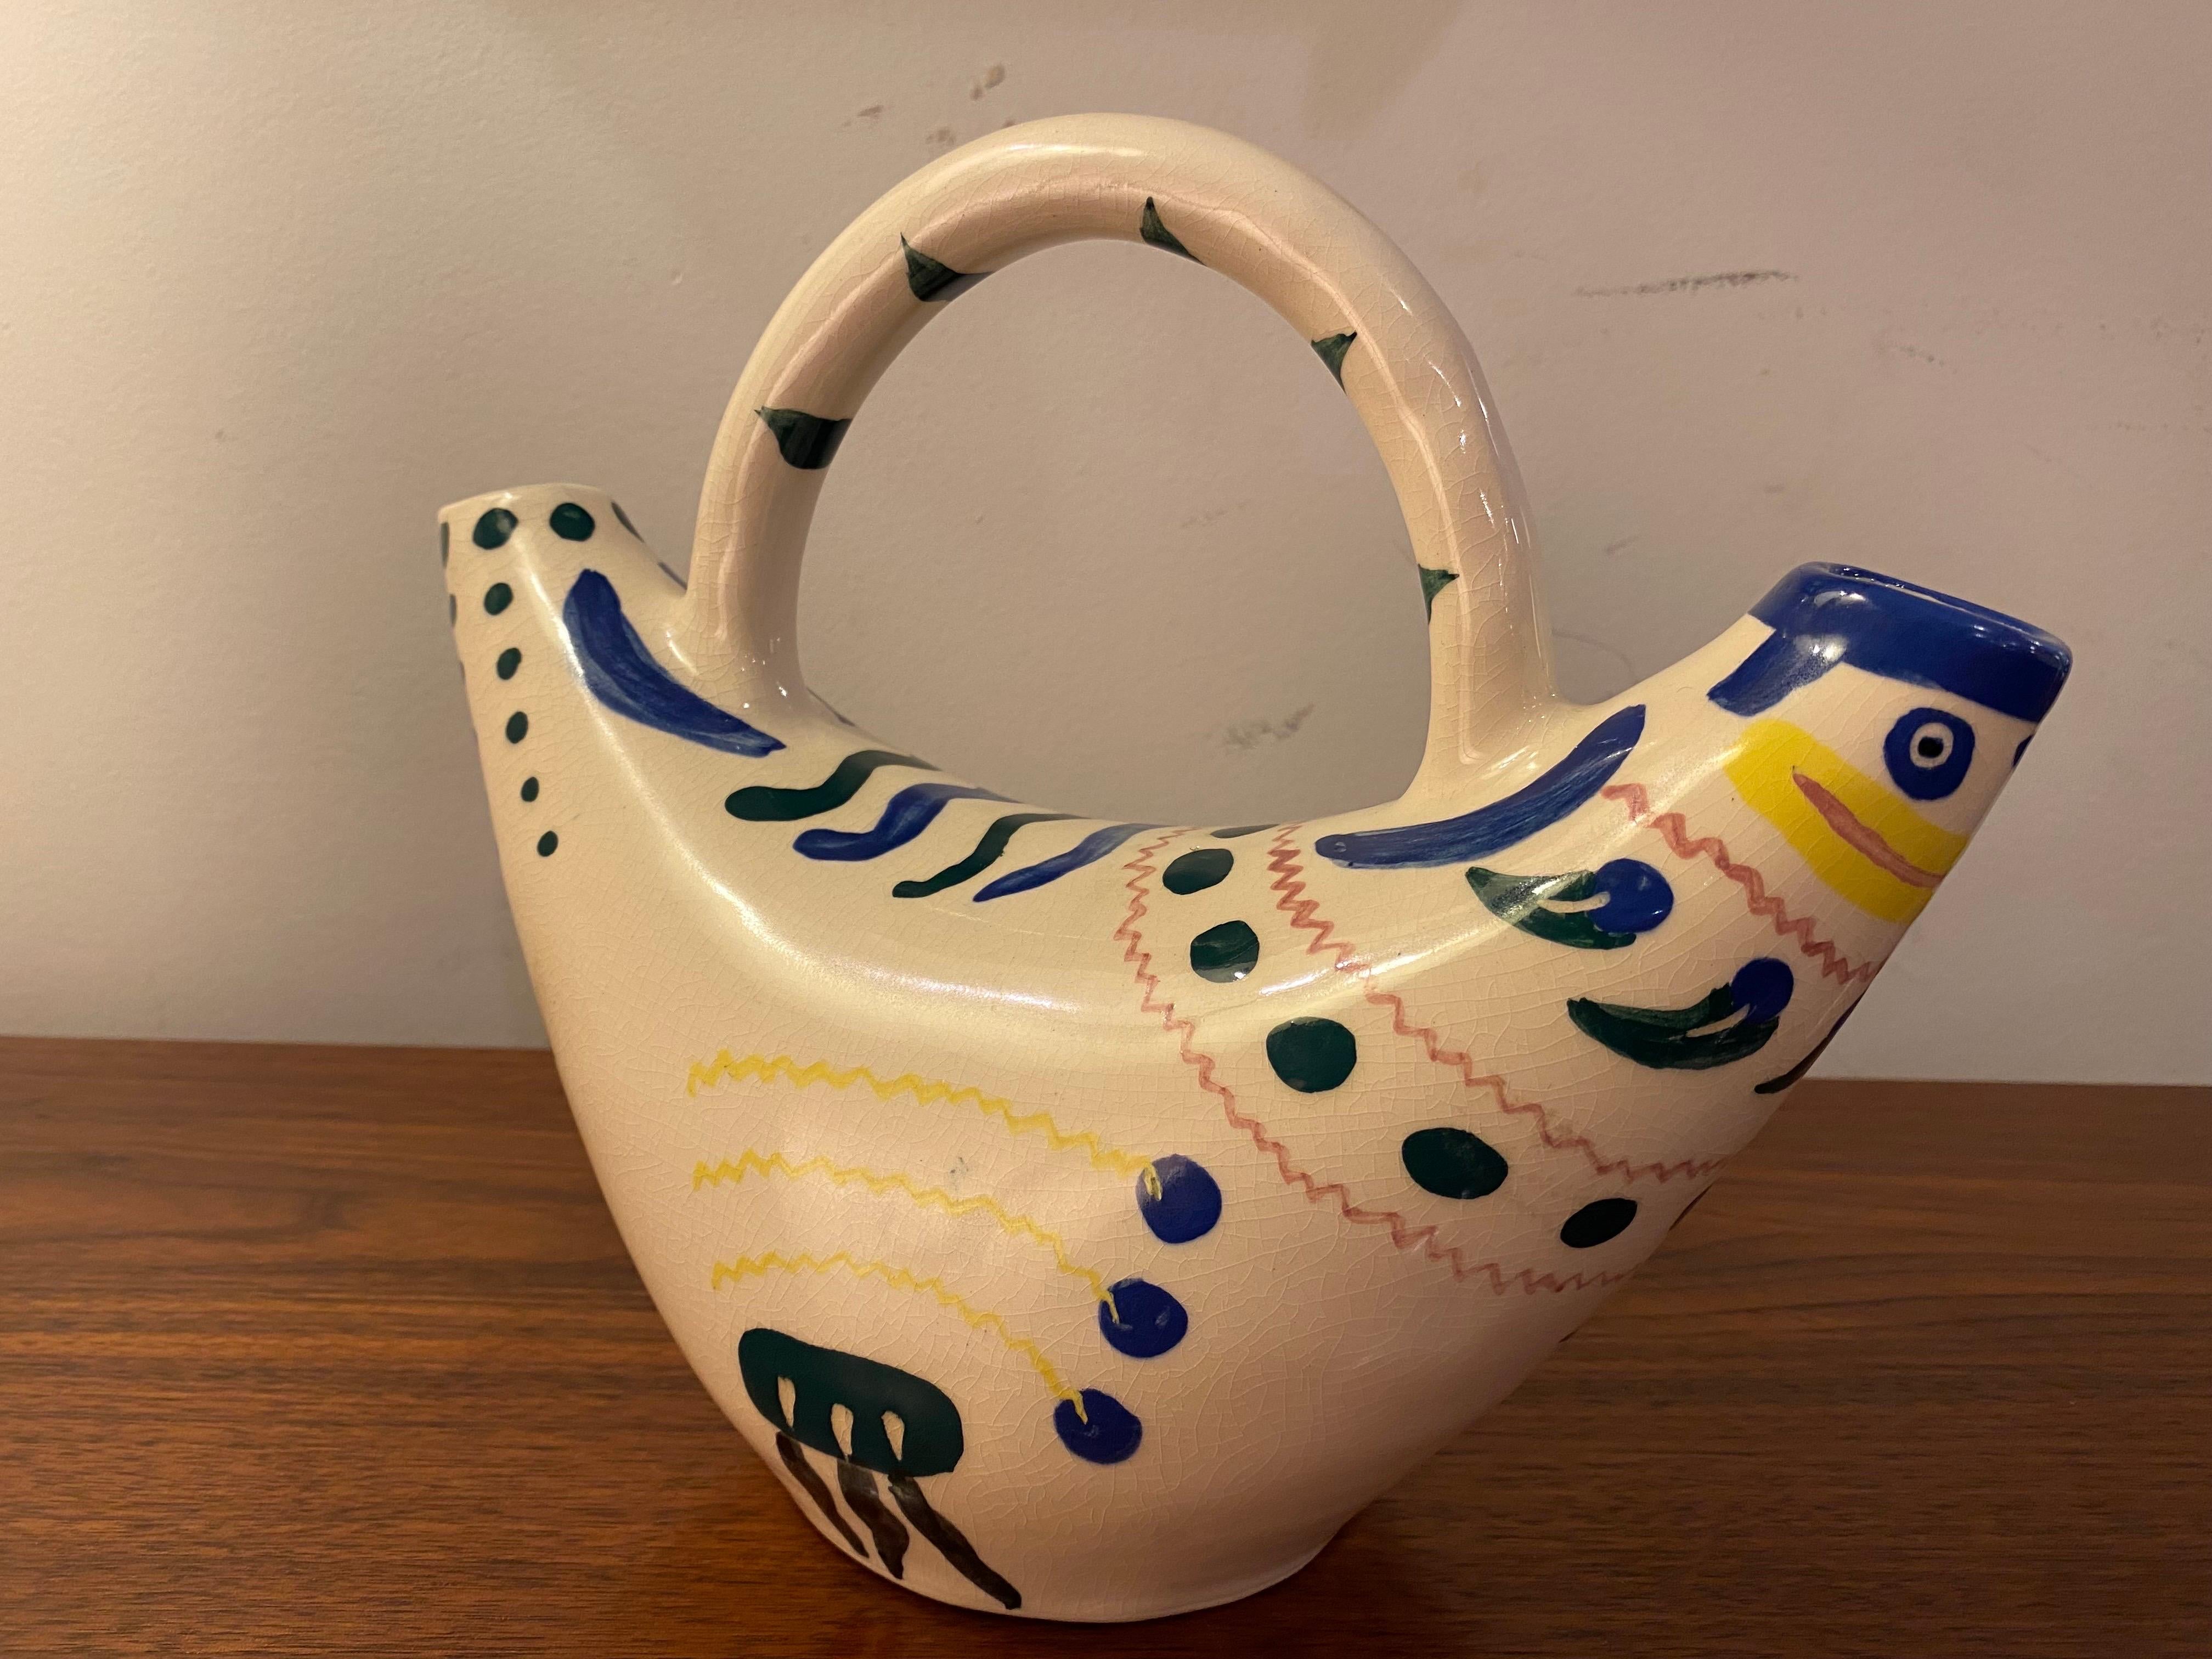 Picasso 2 spouted bird pitcher. Nice colors and size and scale. Signed to body and maker's mark to bottom.